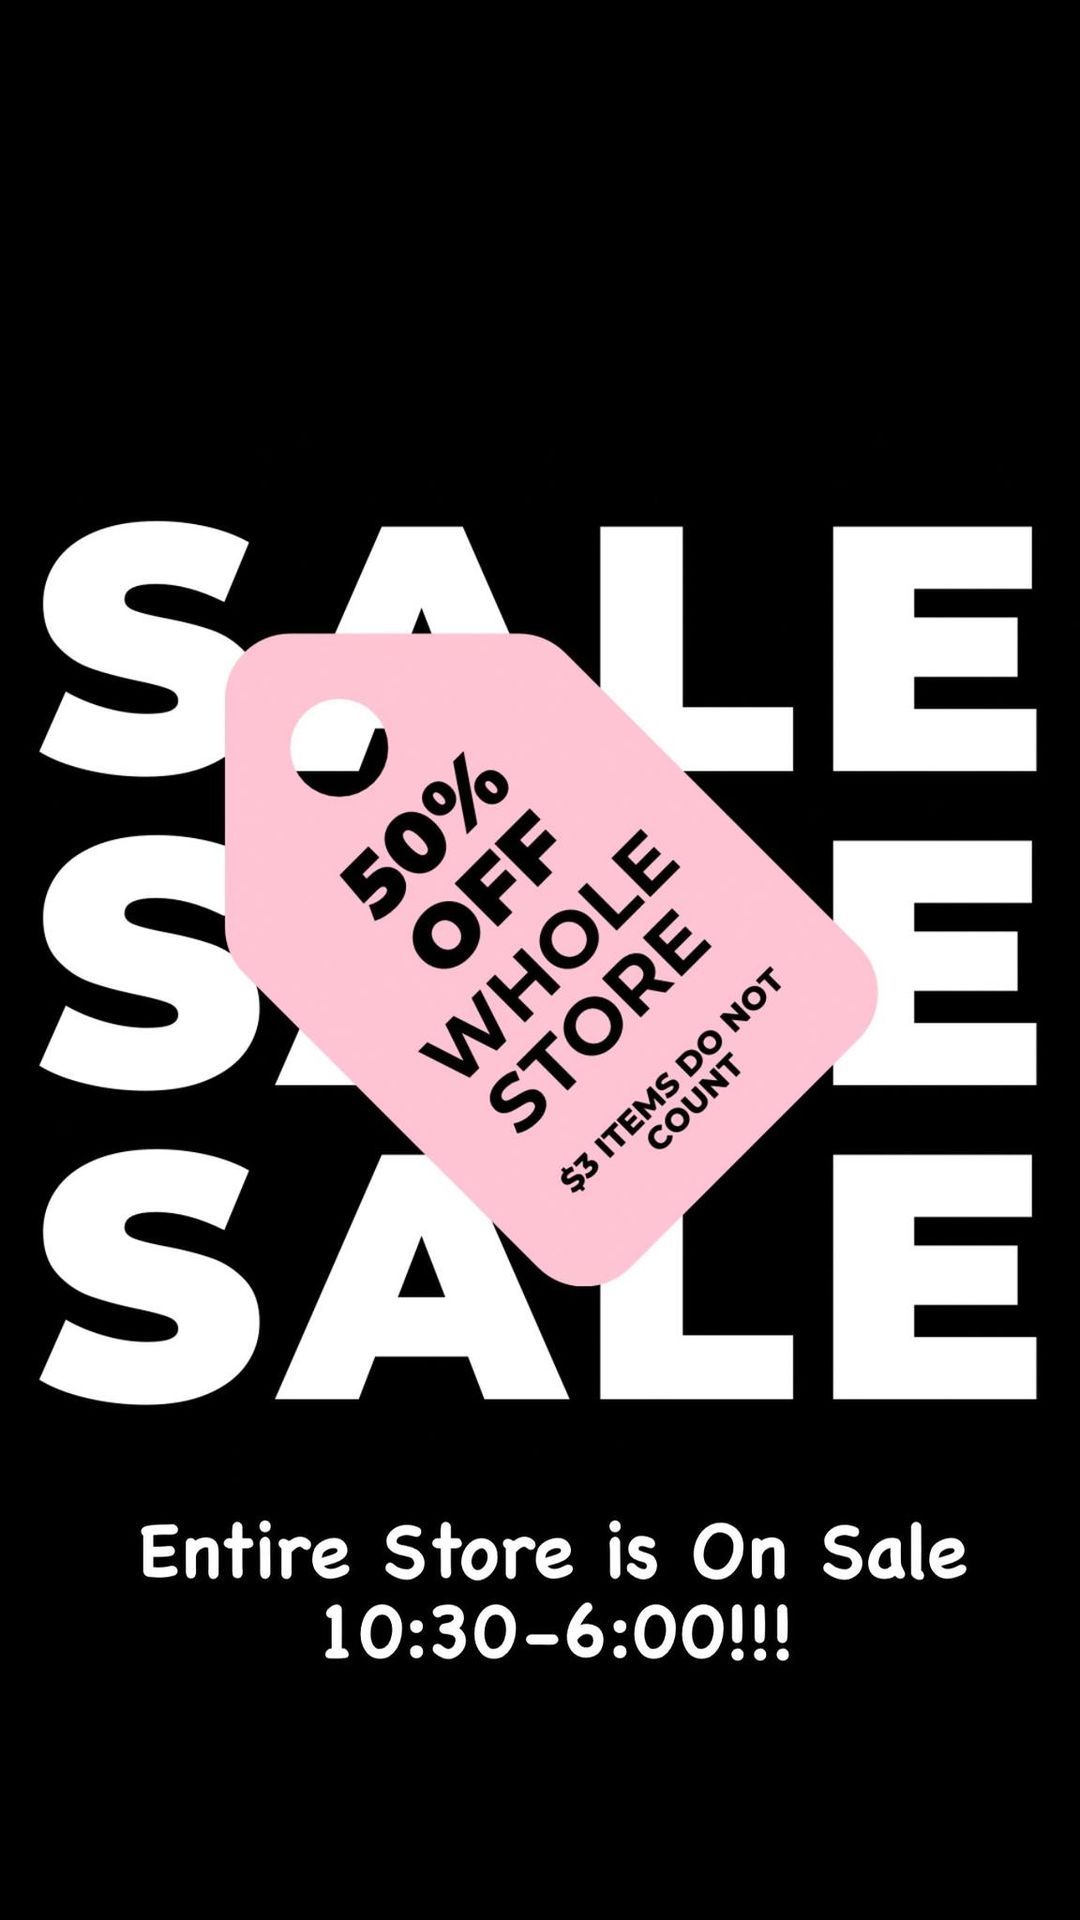 Half Off Sale!! Entire Store is On Sale 